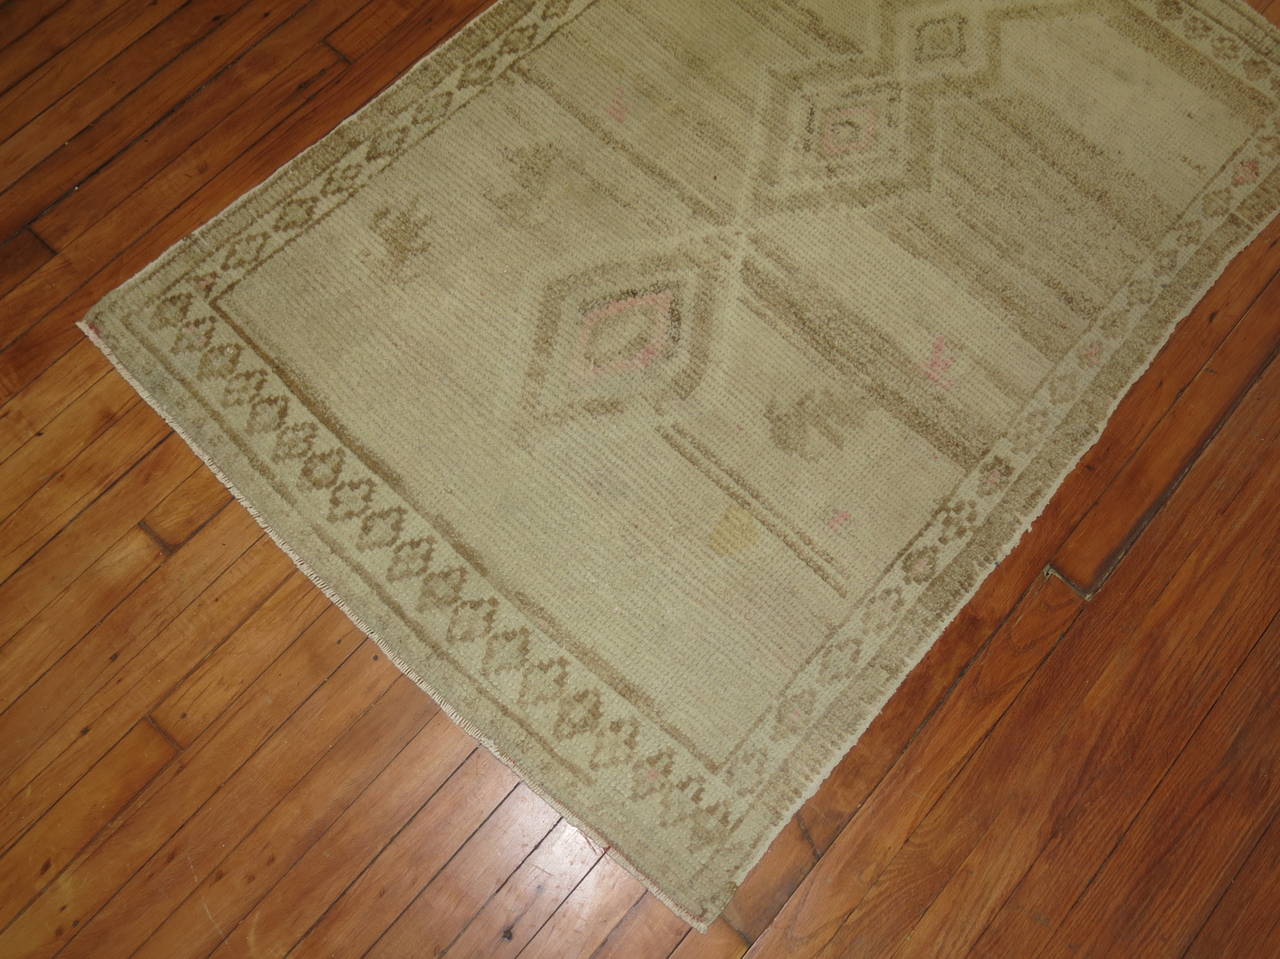 An abstract one of a kind mid-century Turkish Anatolian rug, accents in white, brown and pink.